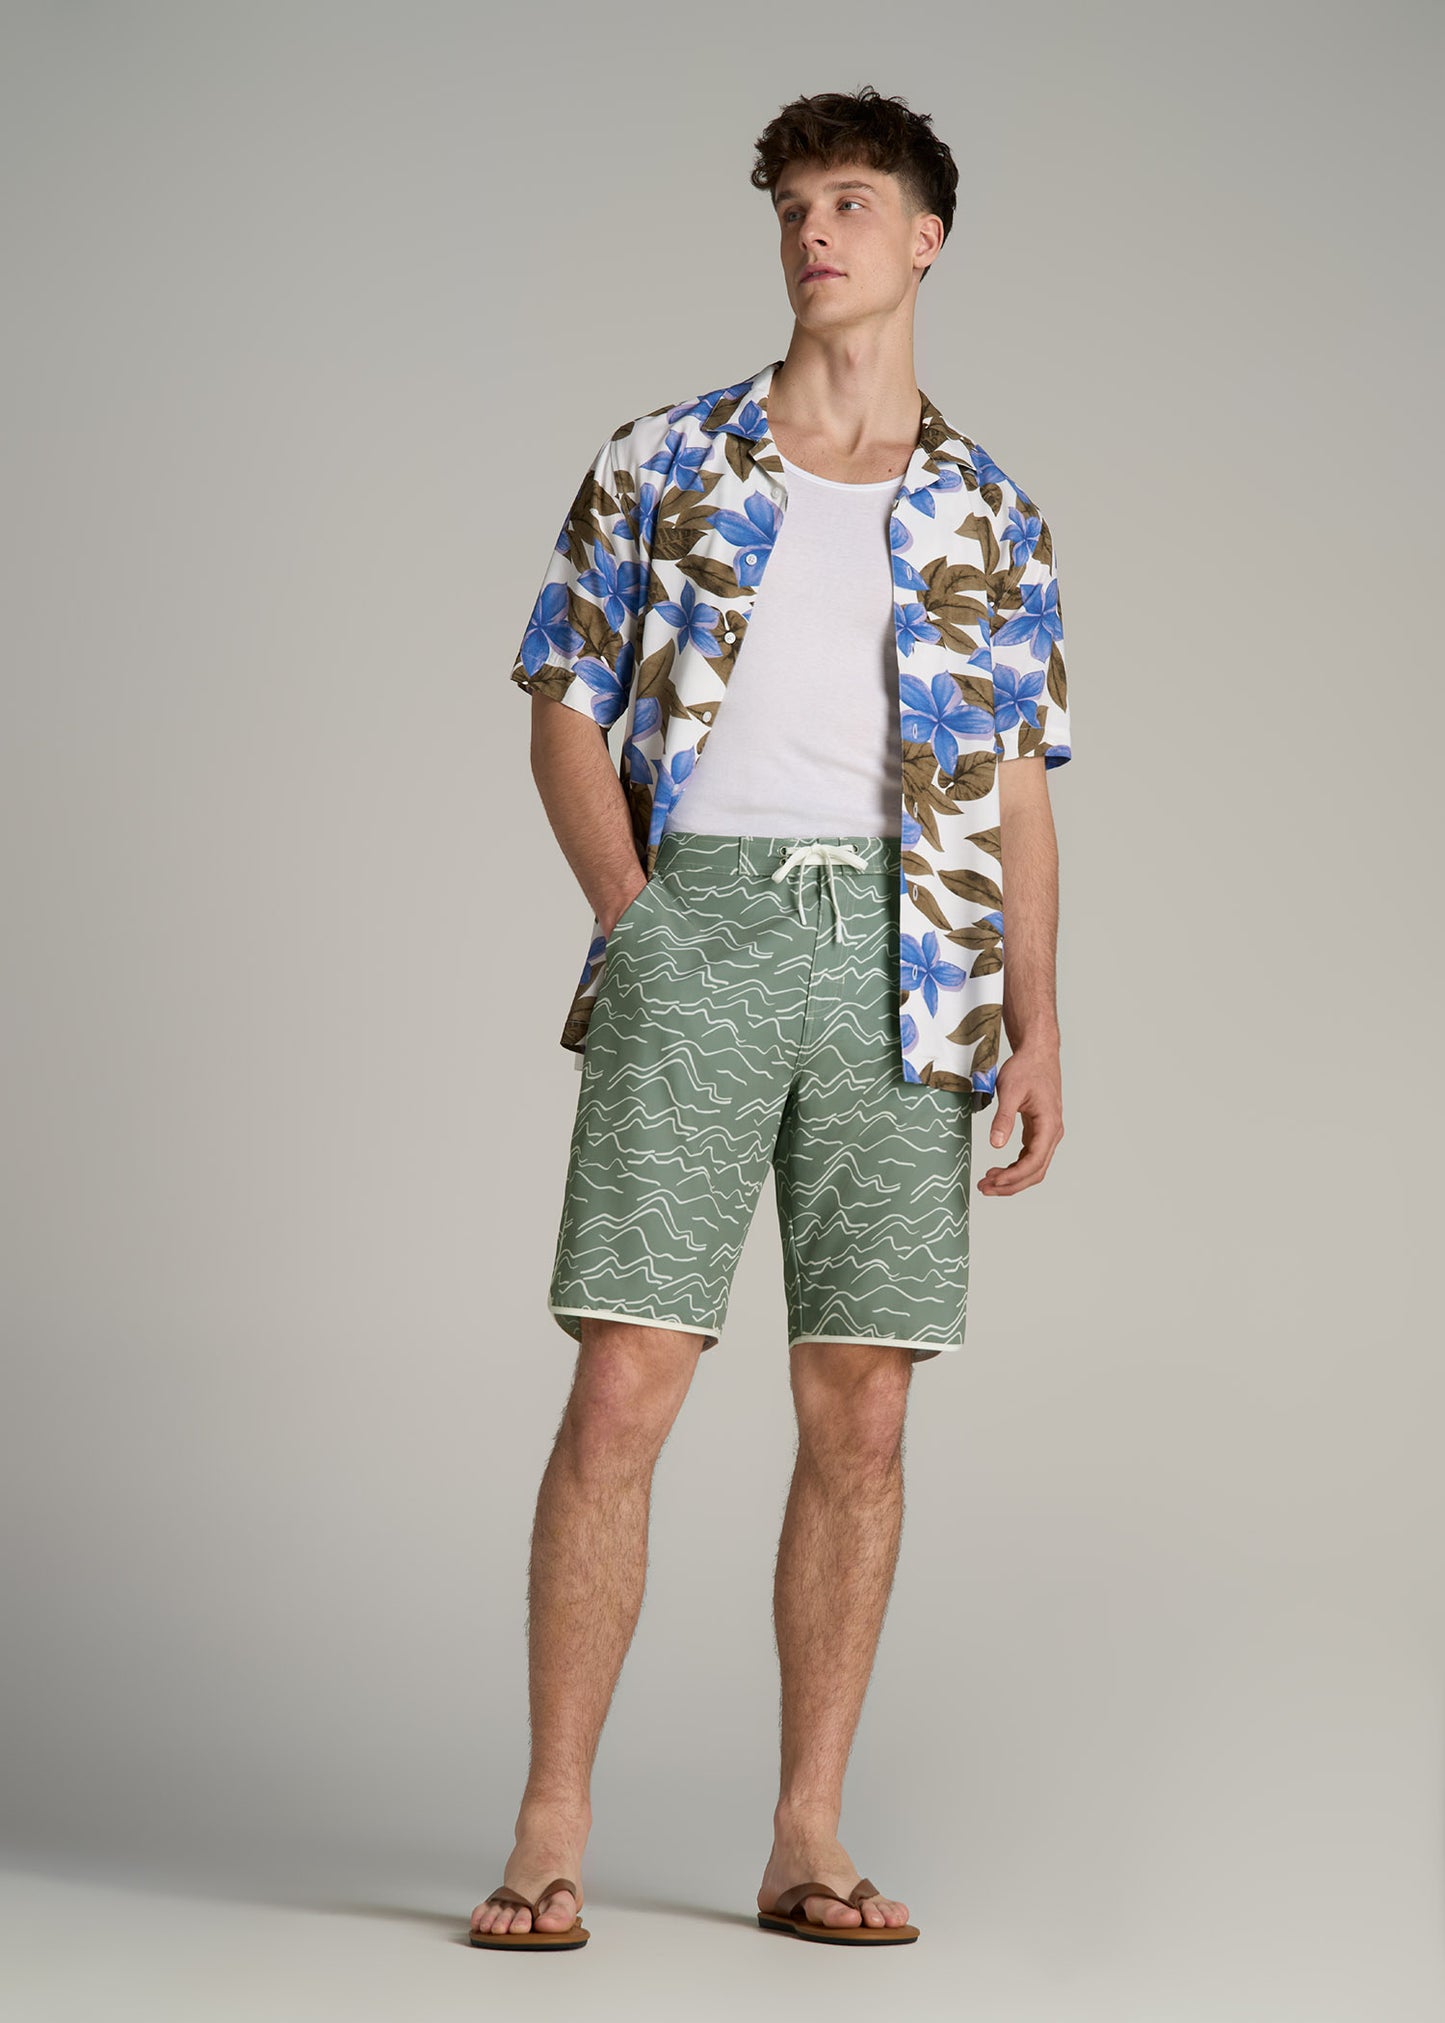 A tall man wearing American Tall's Hi-Tide Scallop Board Shorts in Green Current, Short Sleeve Resort Shirt in Blue Tropical Print and Men's Tall Ribbed Undershirt Tank Top in Bright White.